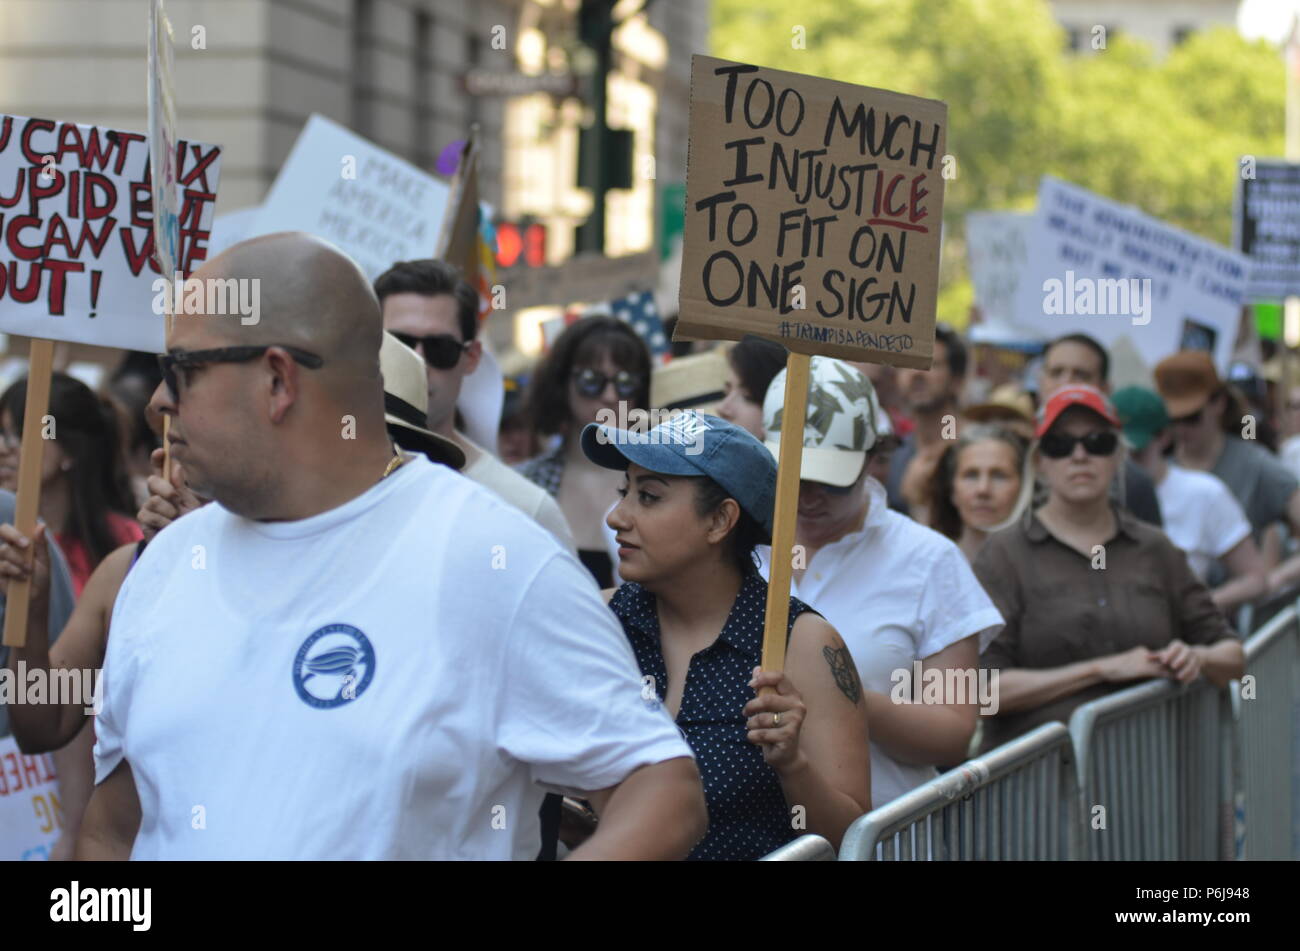 Manhattan, New York, USA. 30th June, 2018. Thousands of demonstrators and immigrant rights activists gathered at Foley Square in Lower Manhattan for the rally against ICE and immigrants deportation to keep families together. Credit: Ryan Rahman/Alamy Live News Stock Photo